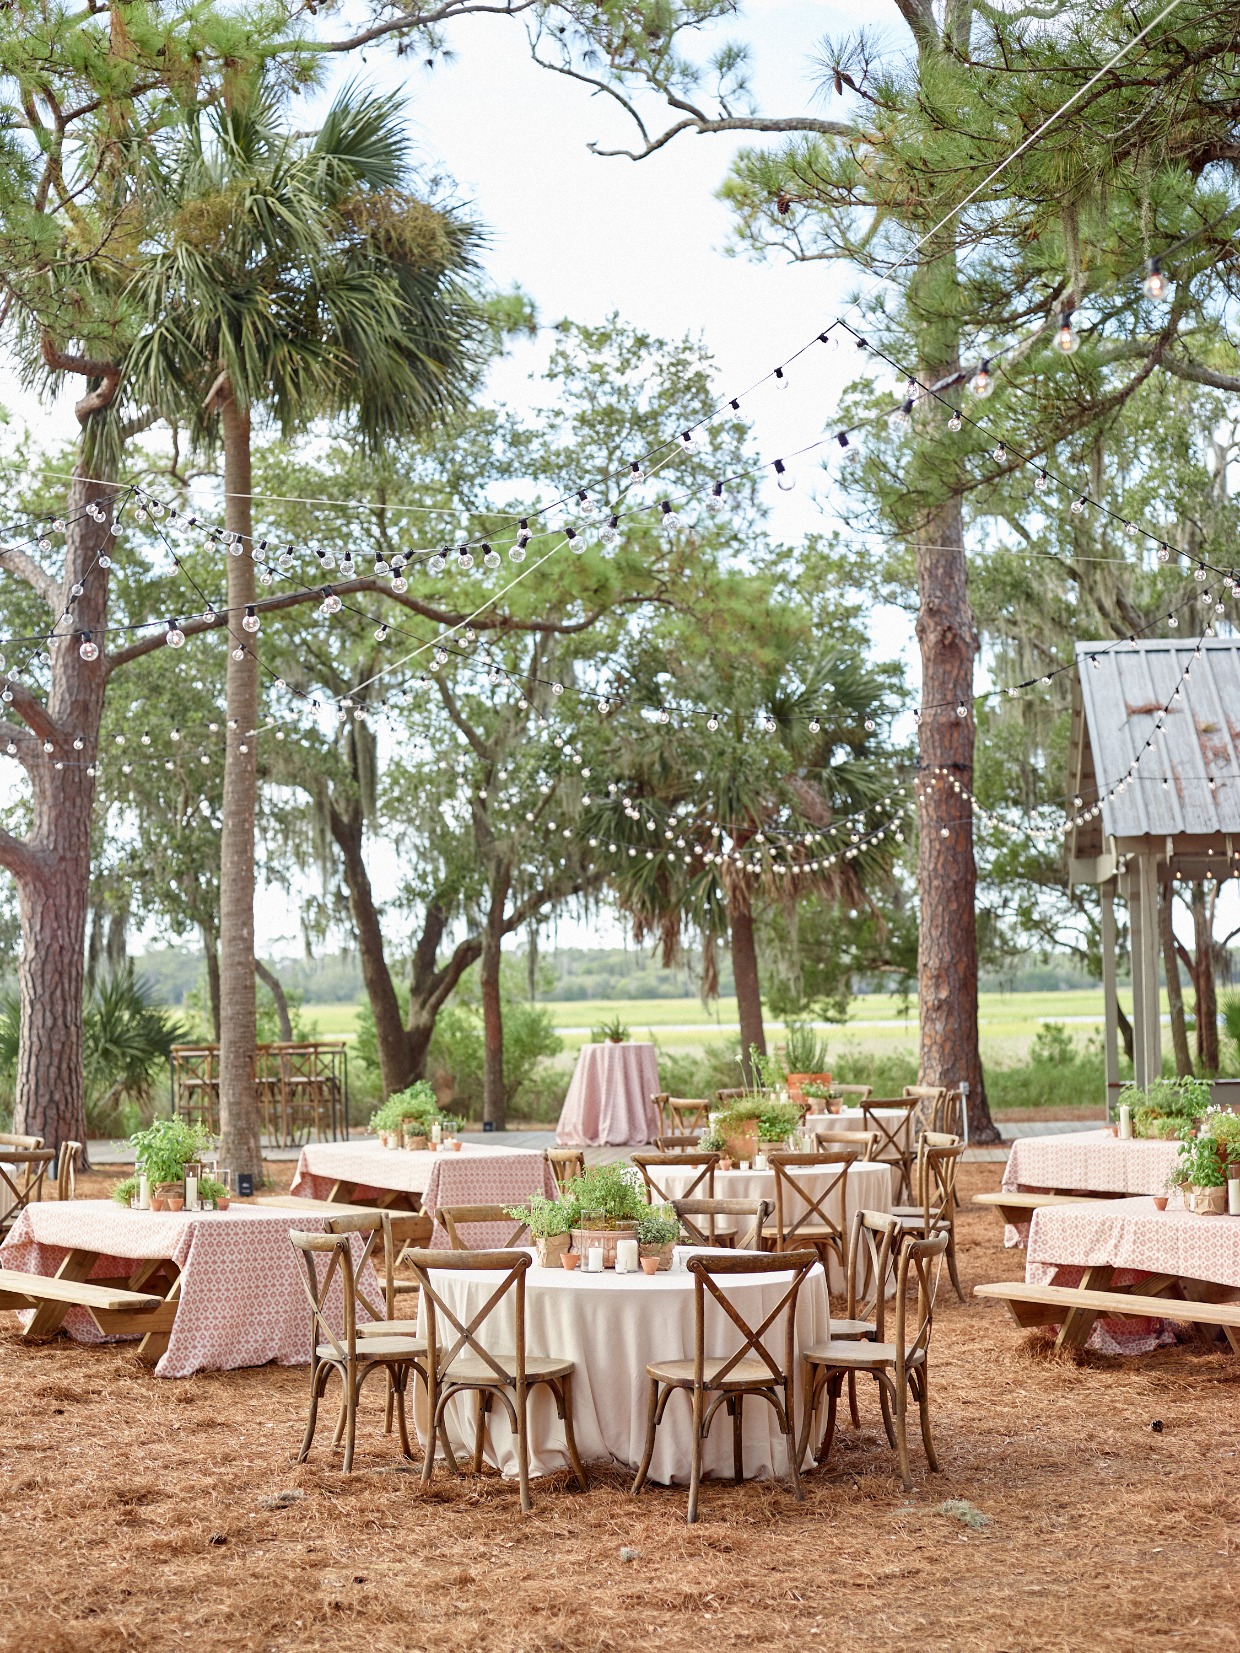 Welcome party area with tables, picnic, tables, string lights, and herb centerpieces